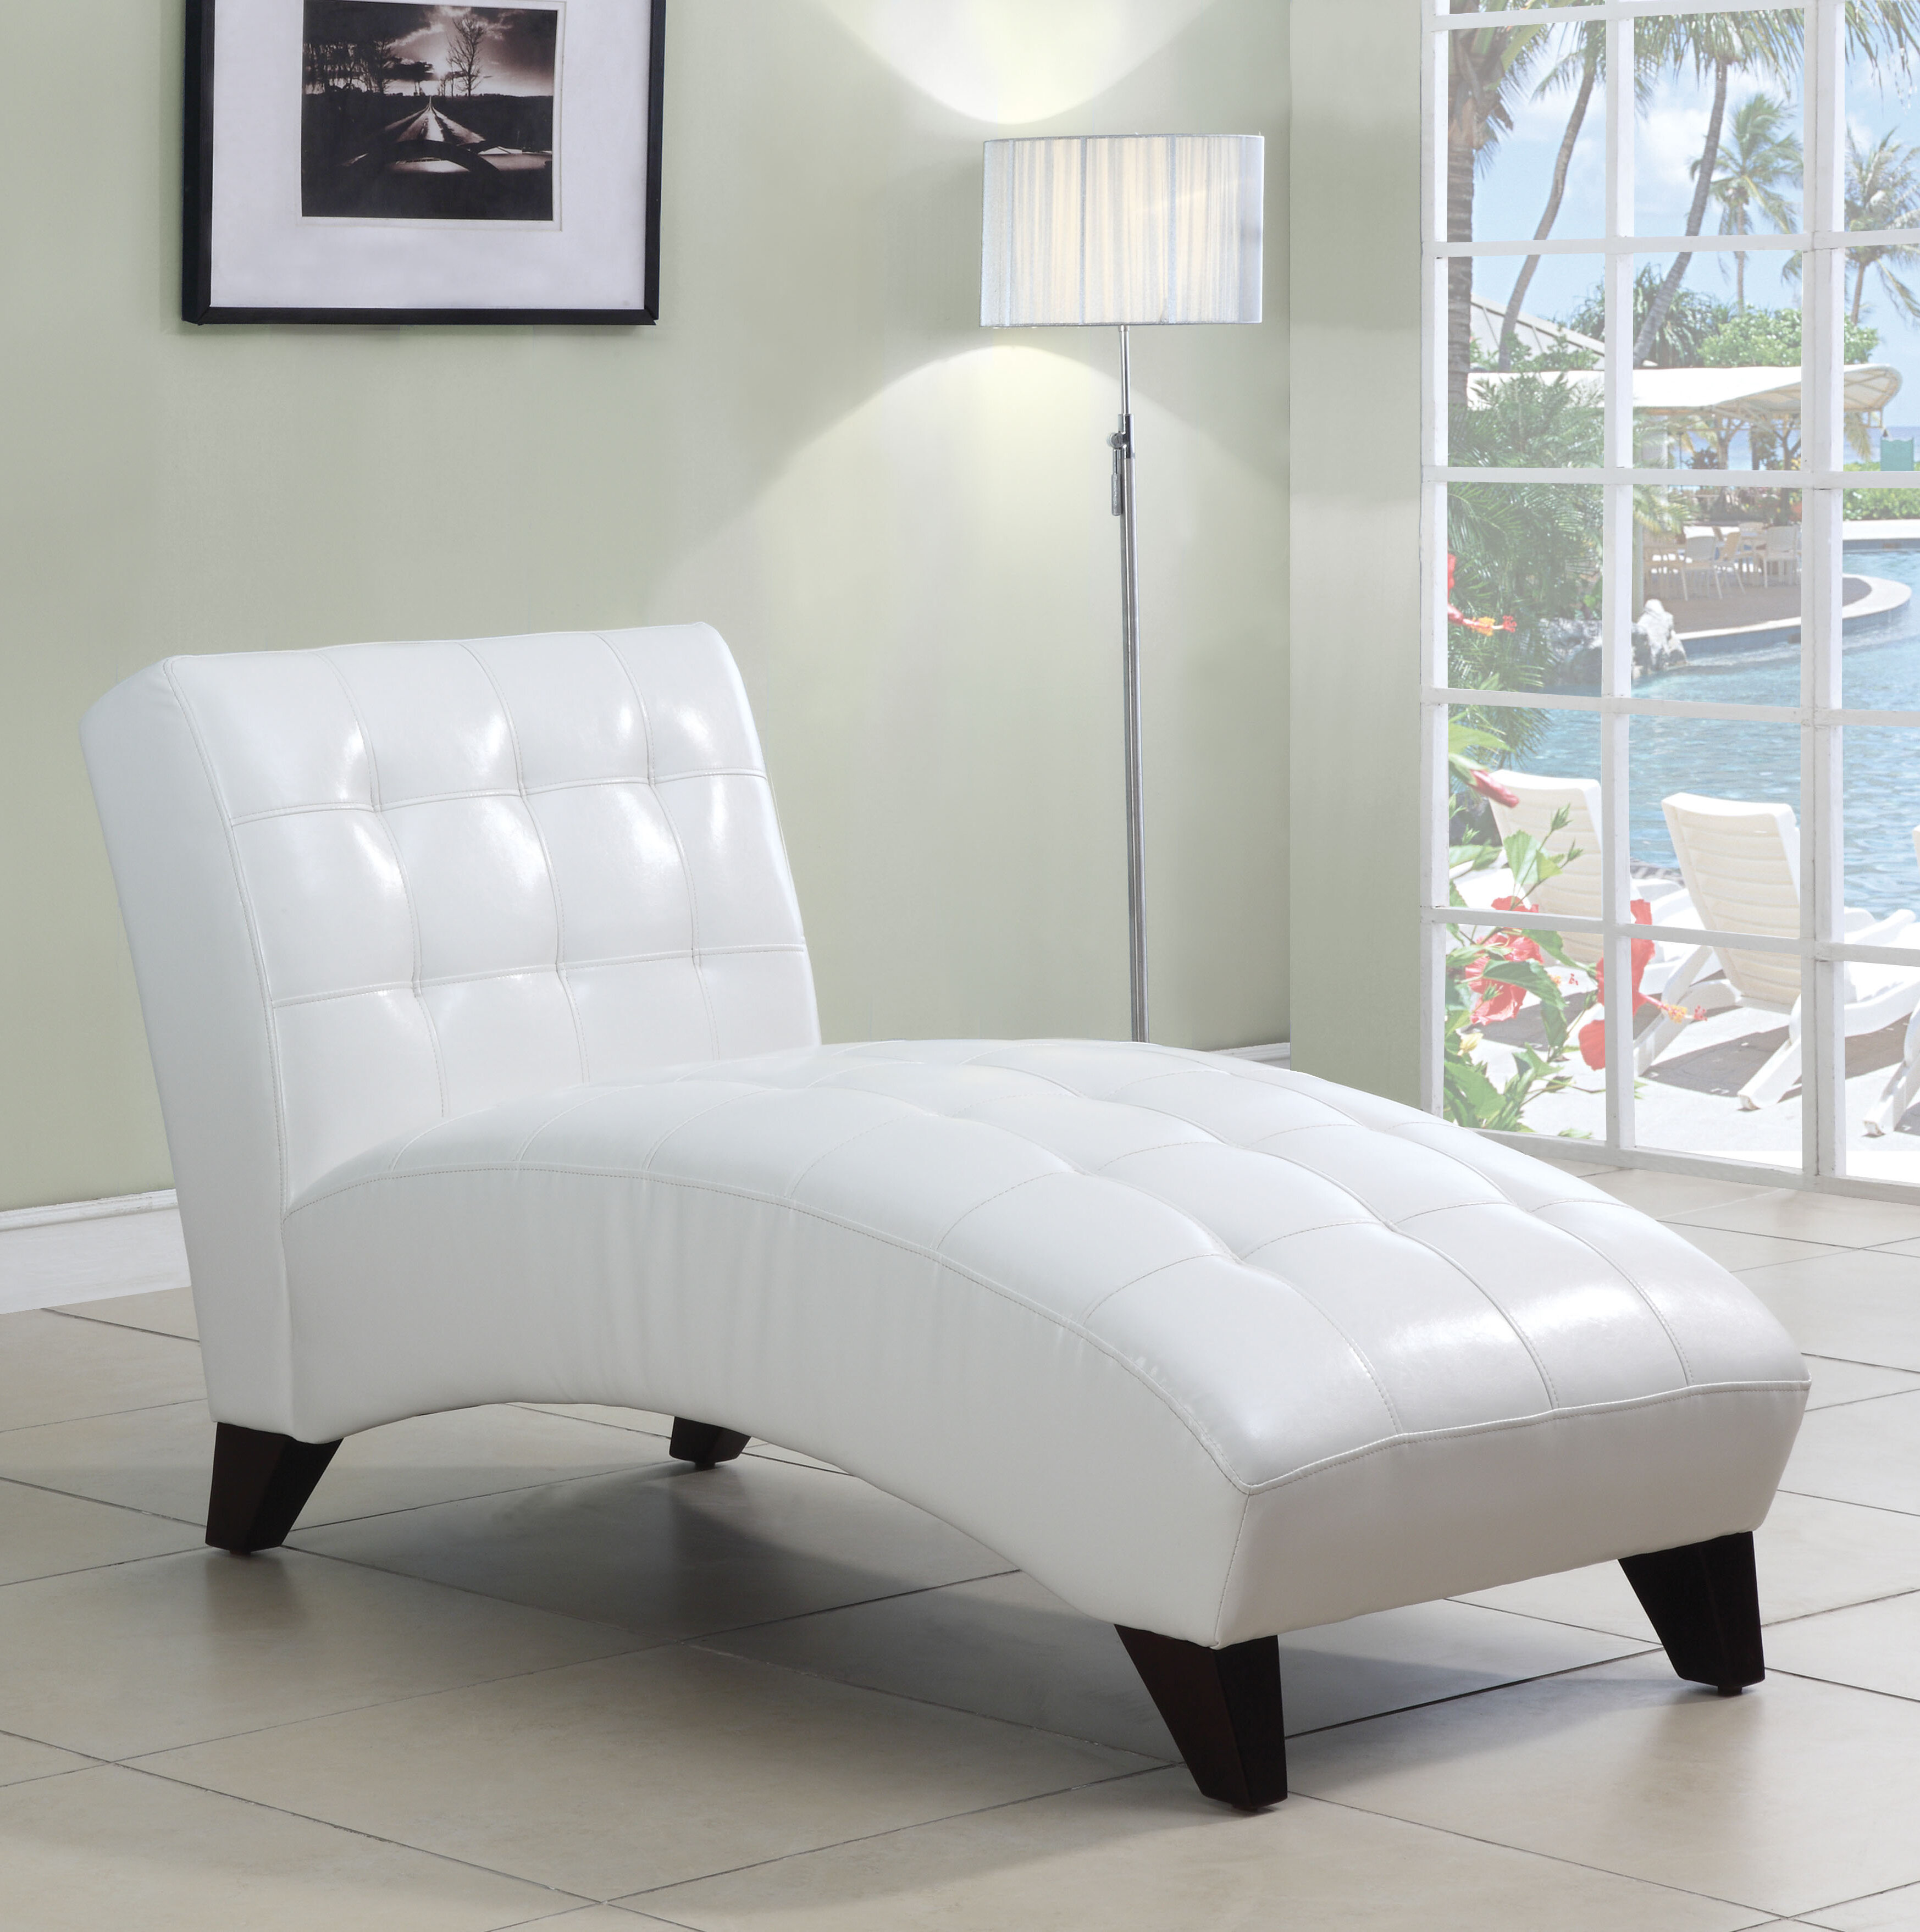 Hering Vegan Leather Chaise Lounge